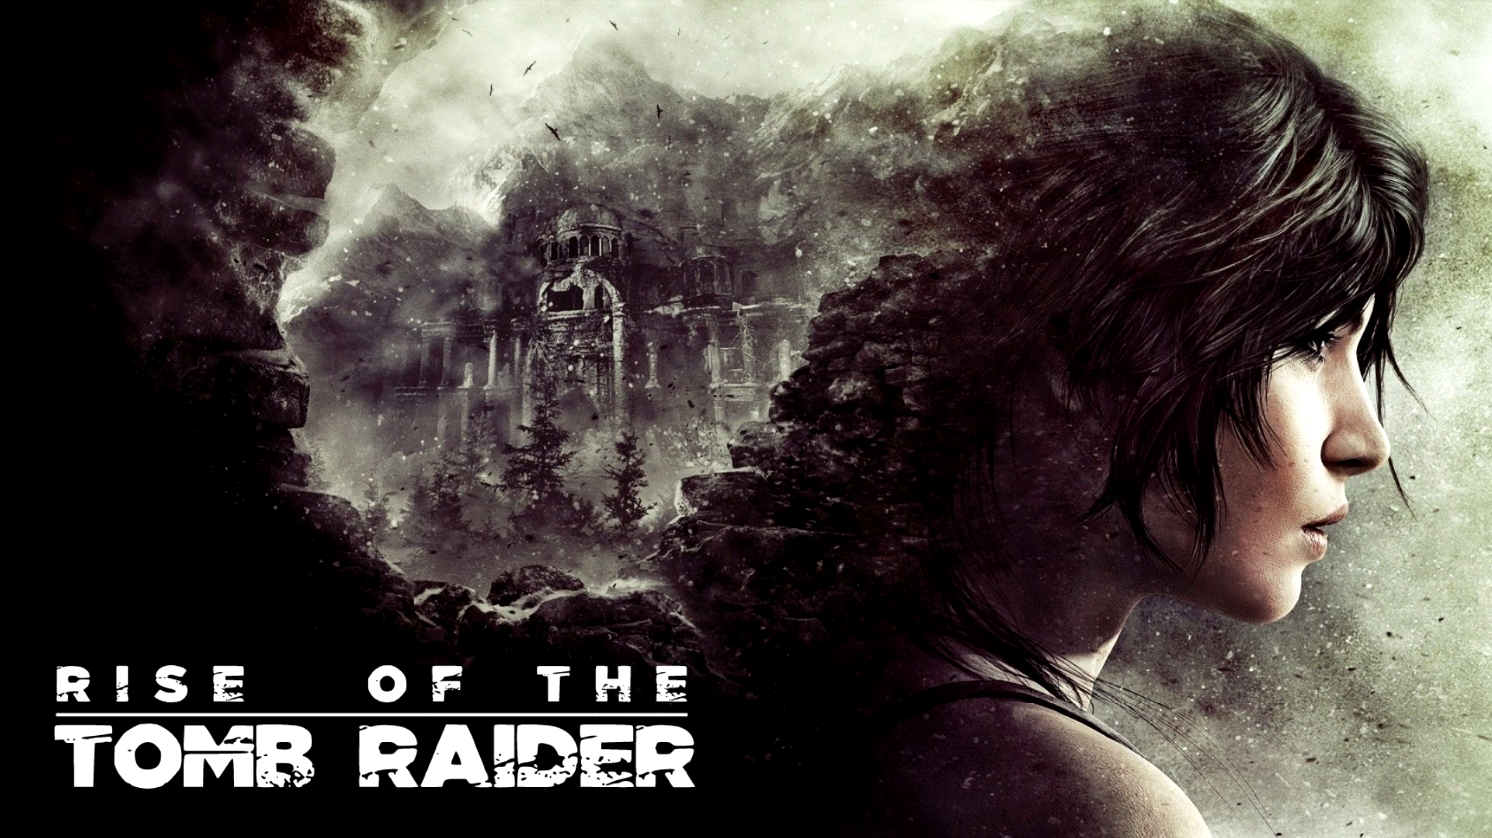 Rice of the Tomb Raider: Heilig